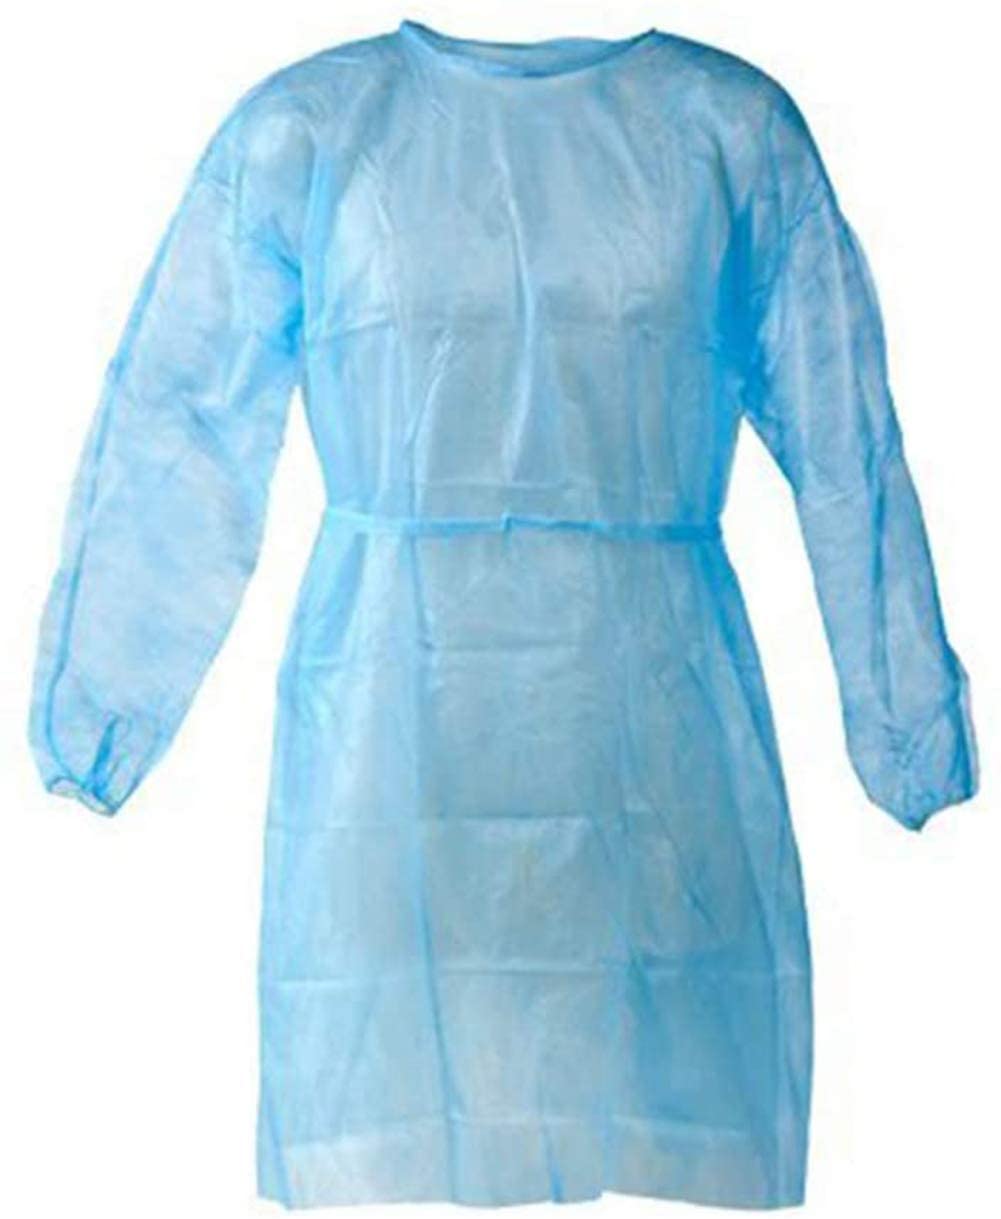 Generic Disposable Isolation Gown – Level 2, 40 GSM - 100/CS